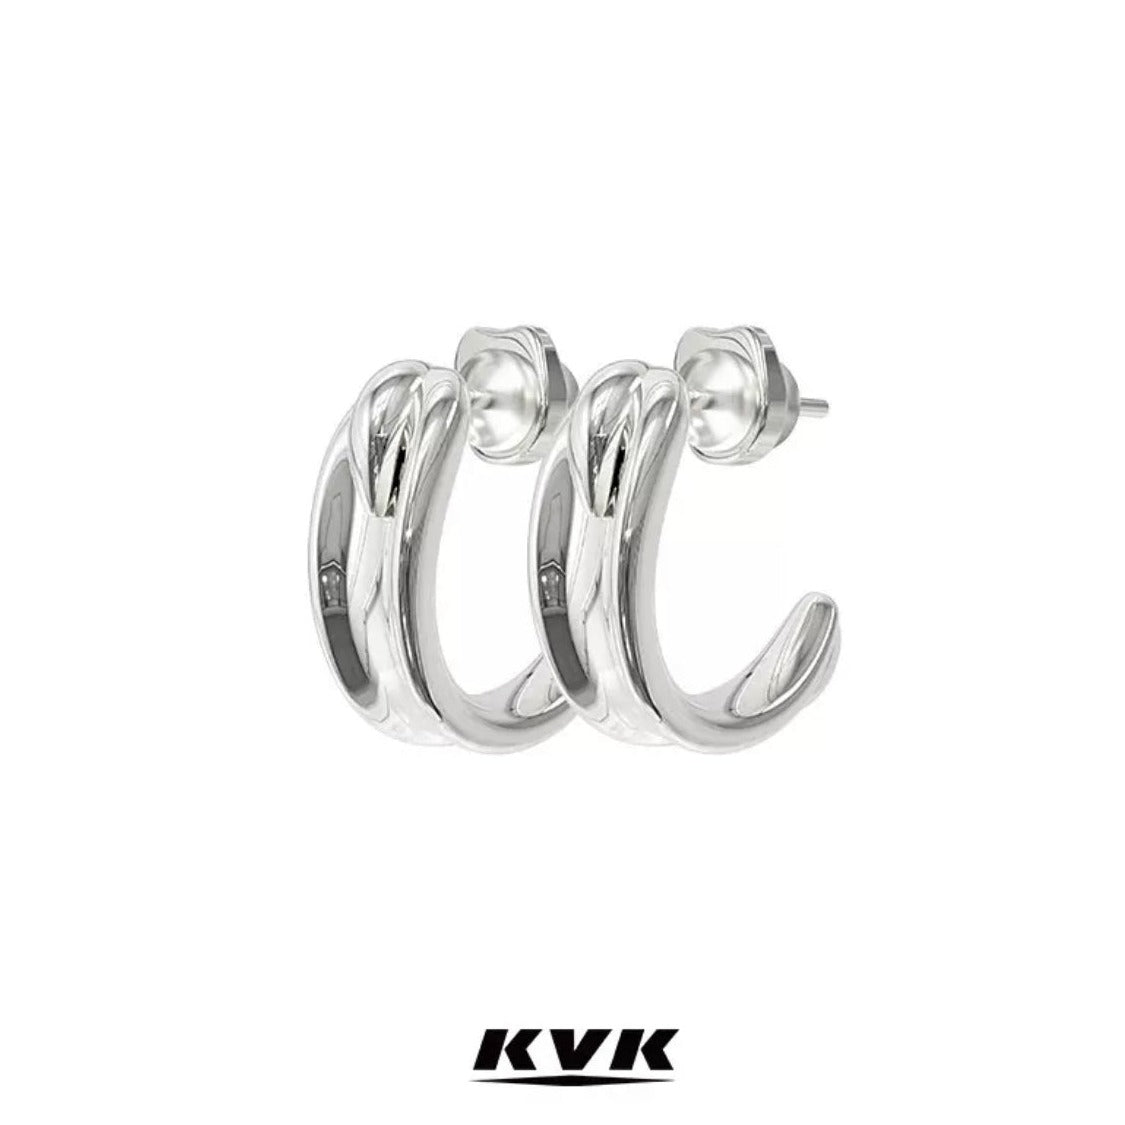 KVK Looping Baroque Collection Recessed Earrings - Fixxshop